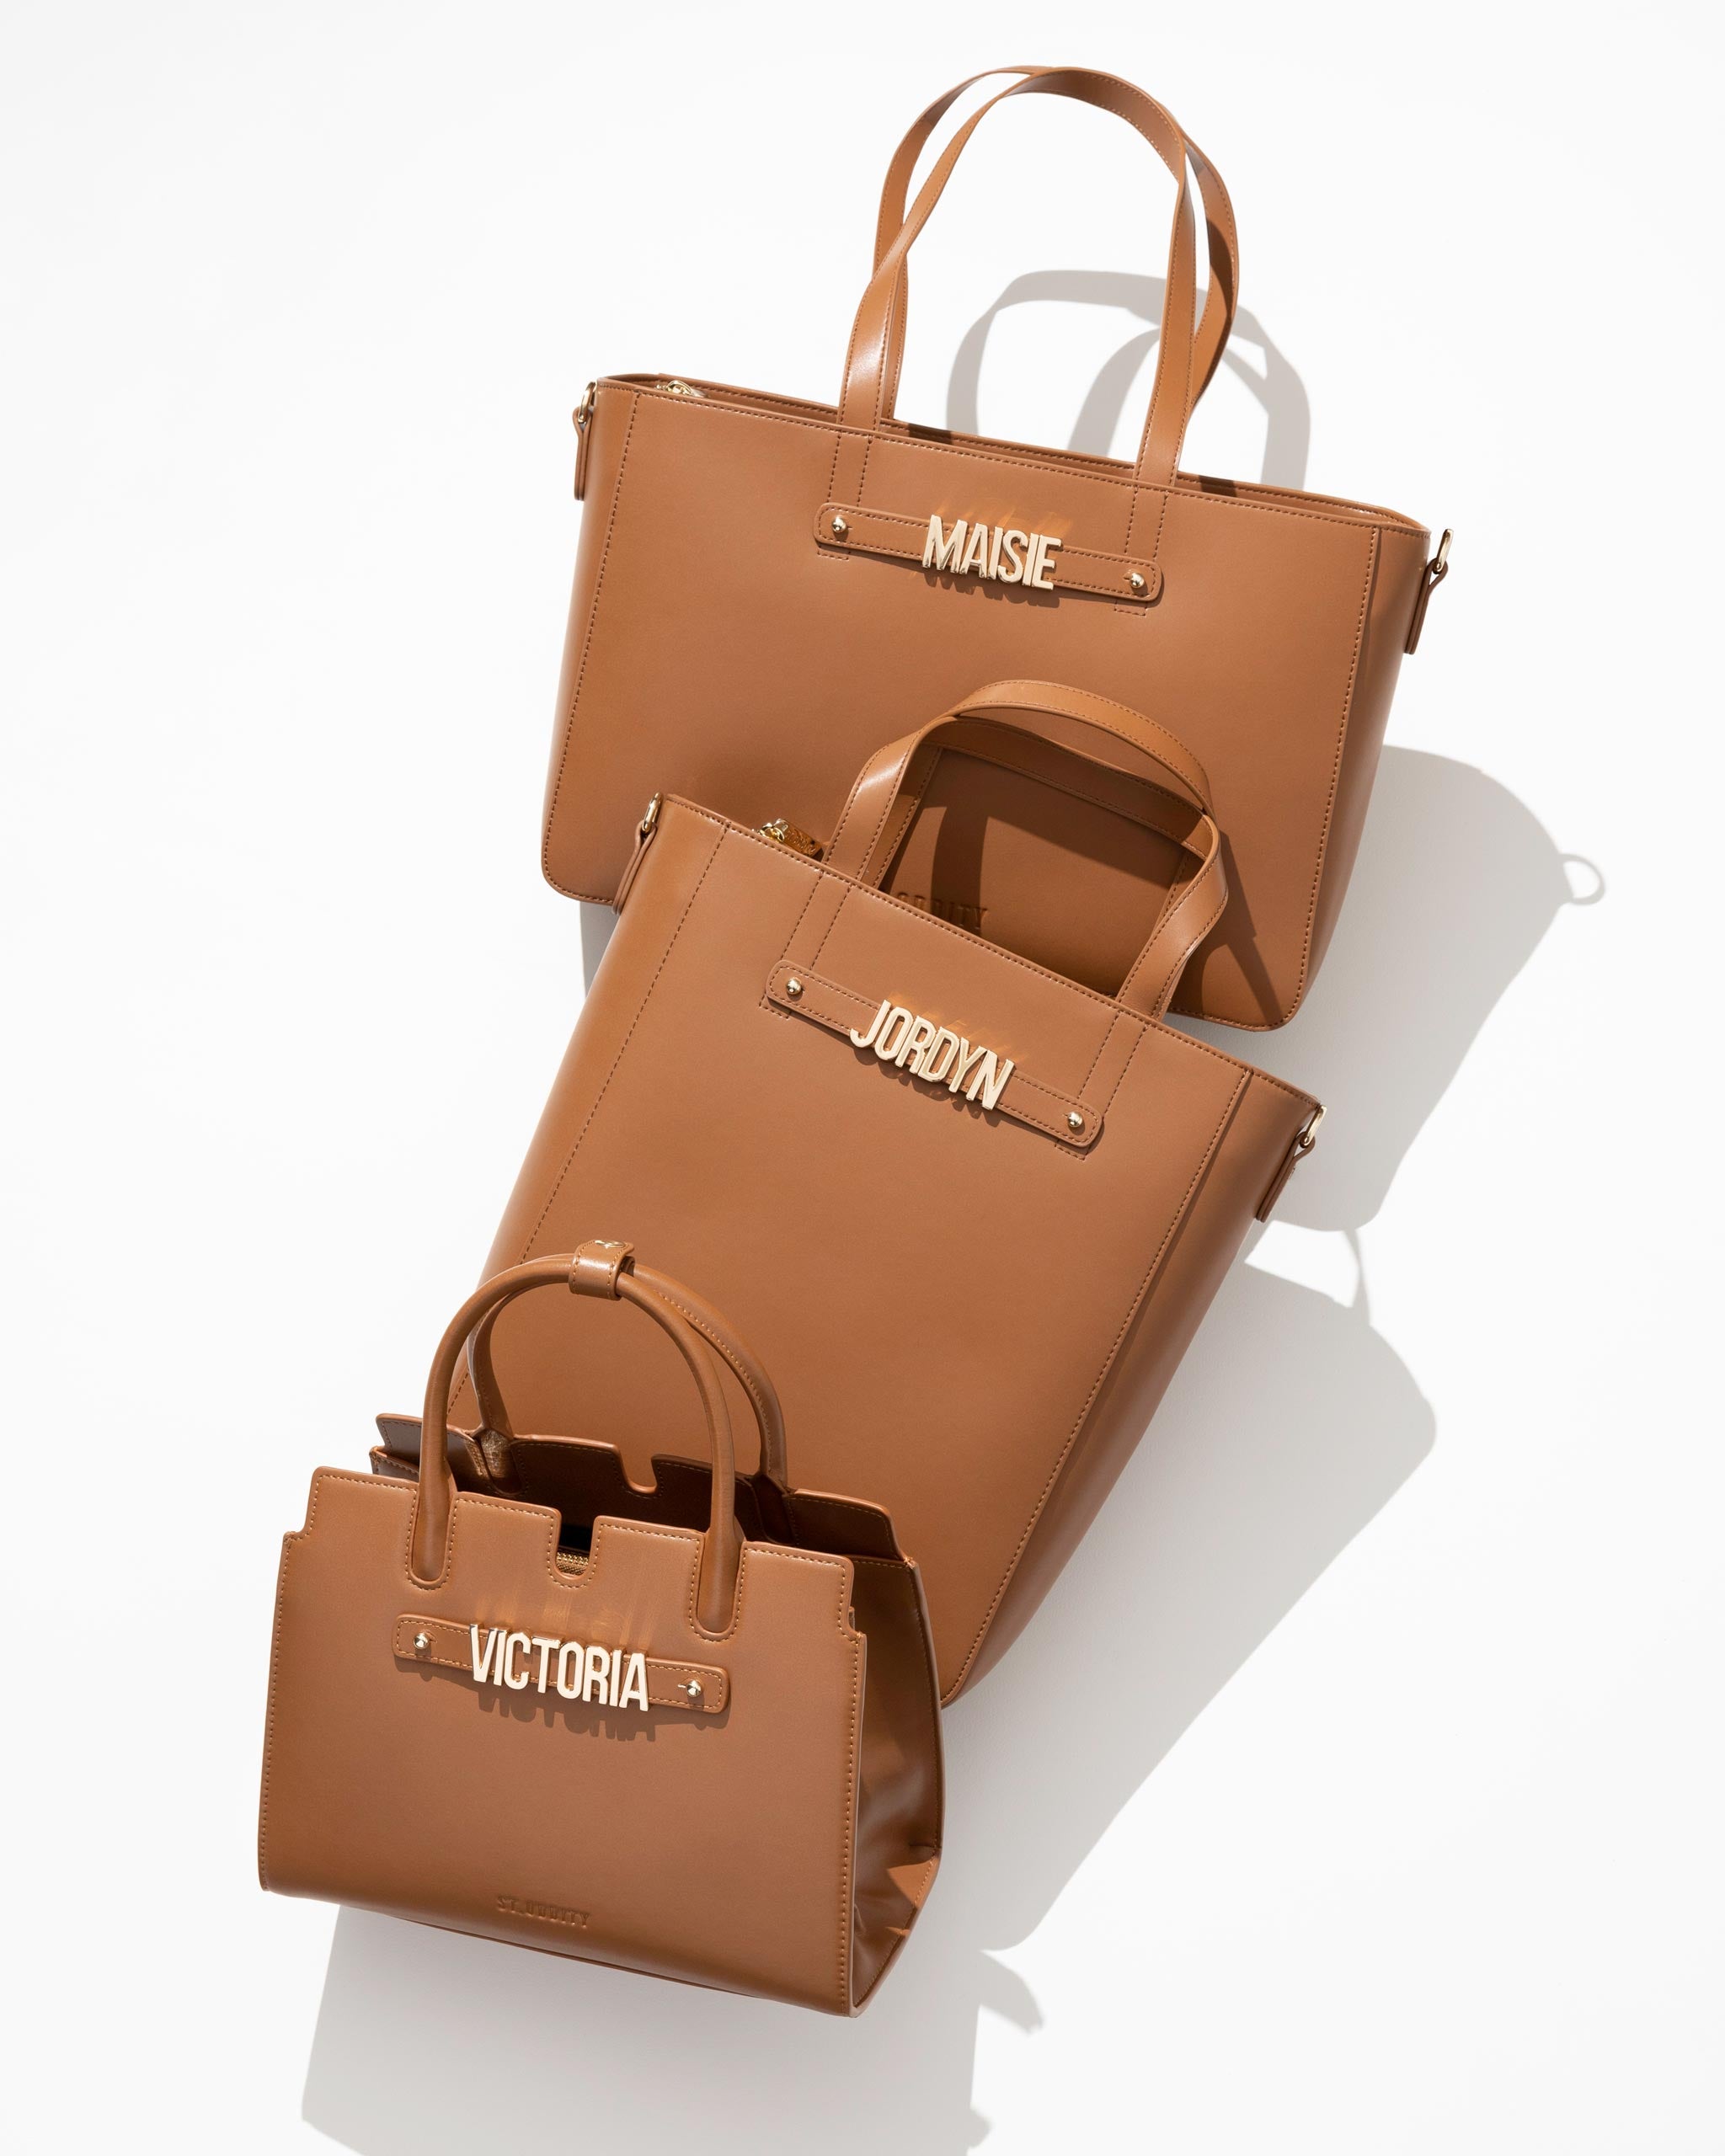 Wide Tote in Tan with Personalised Hardware